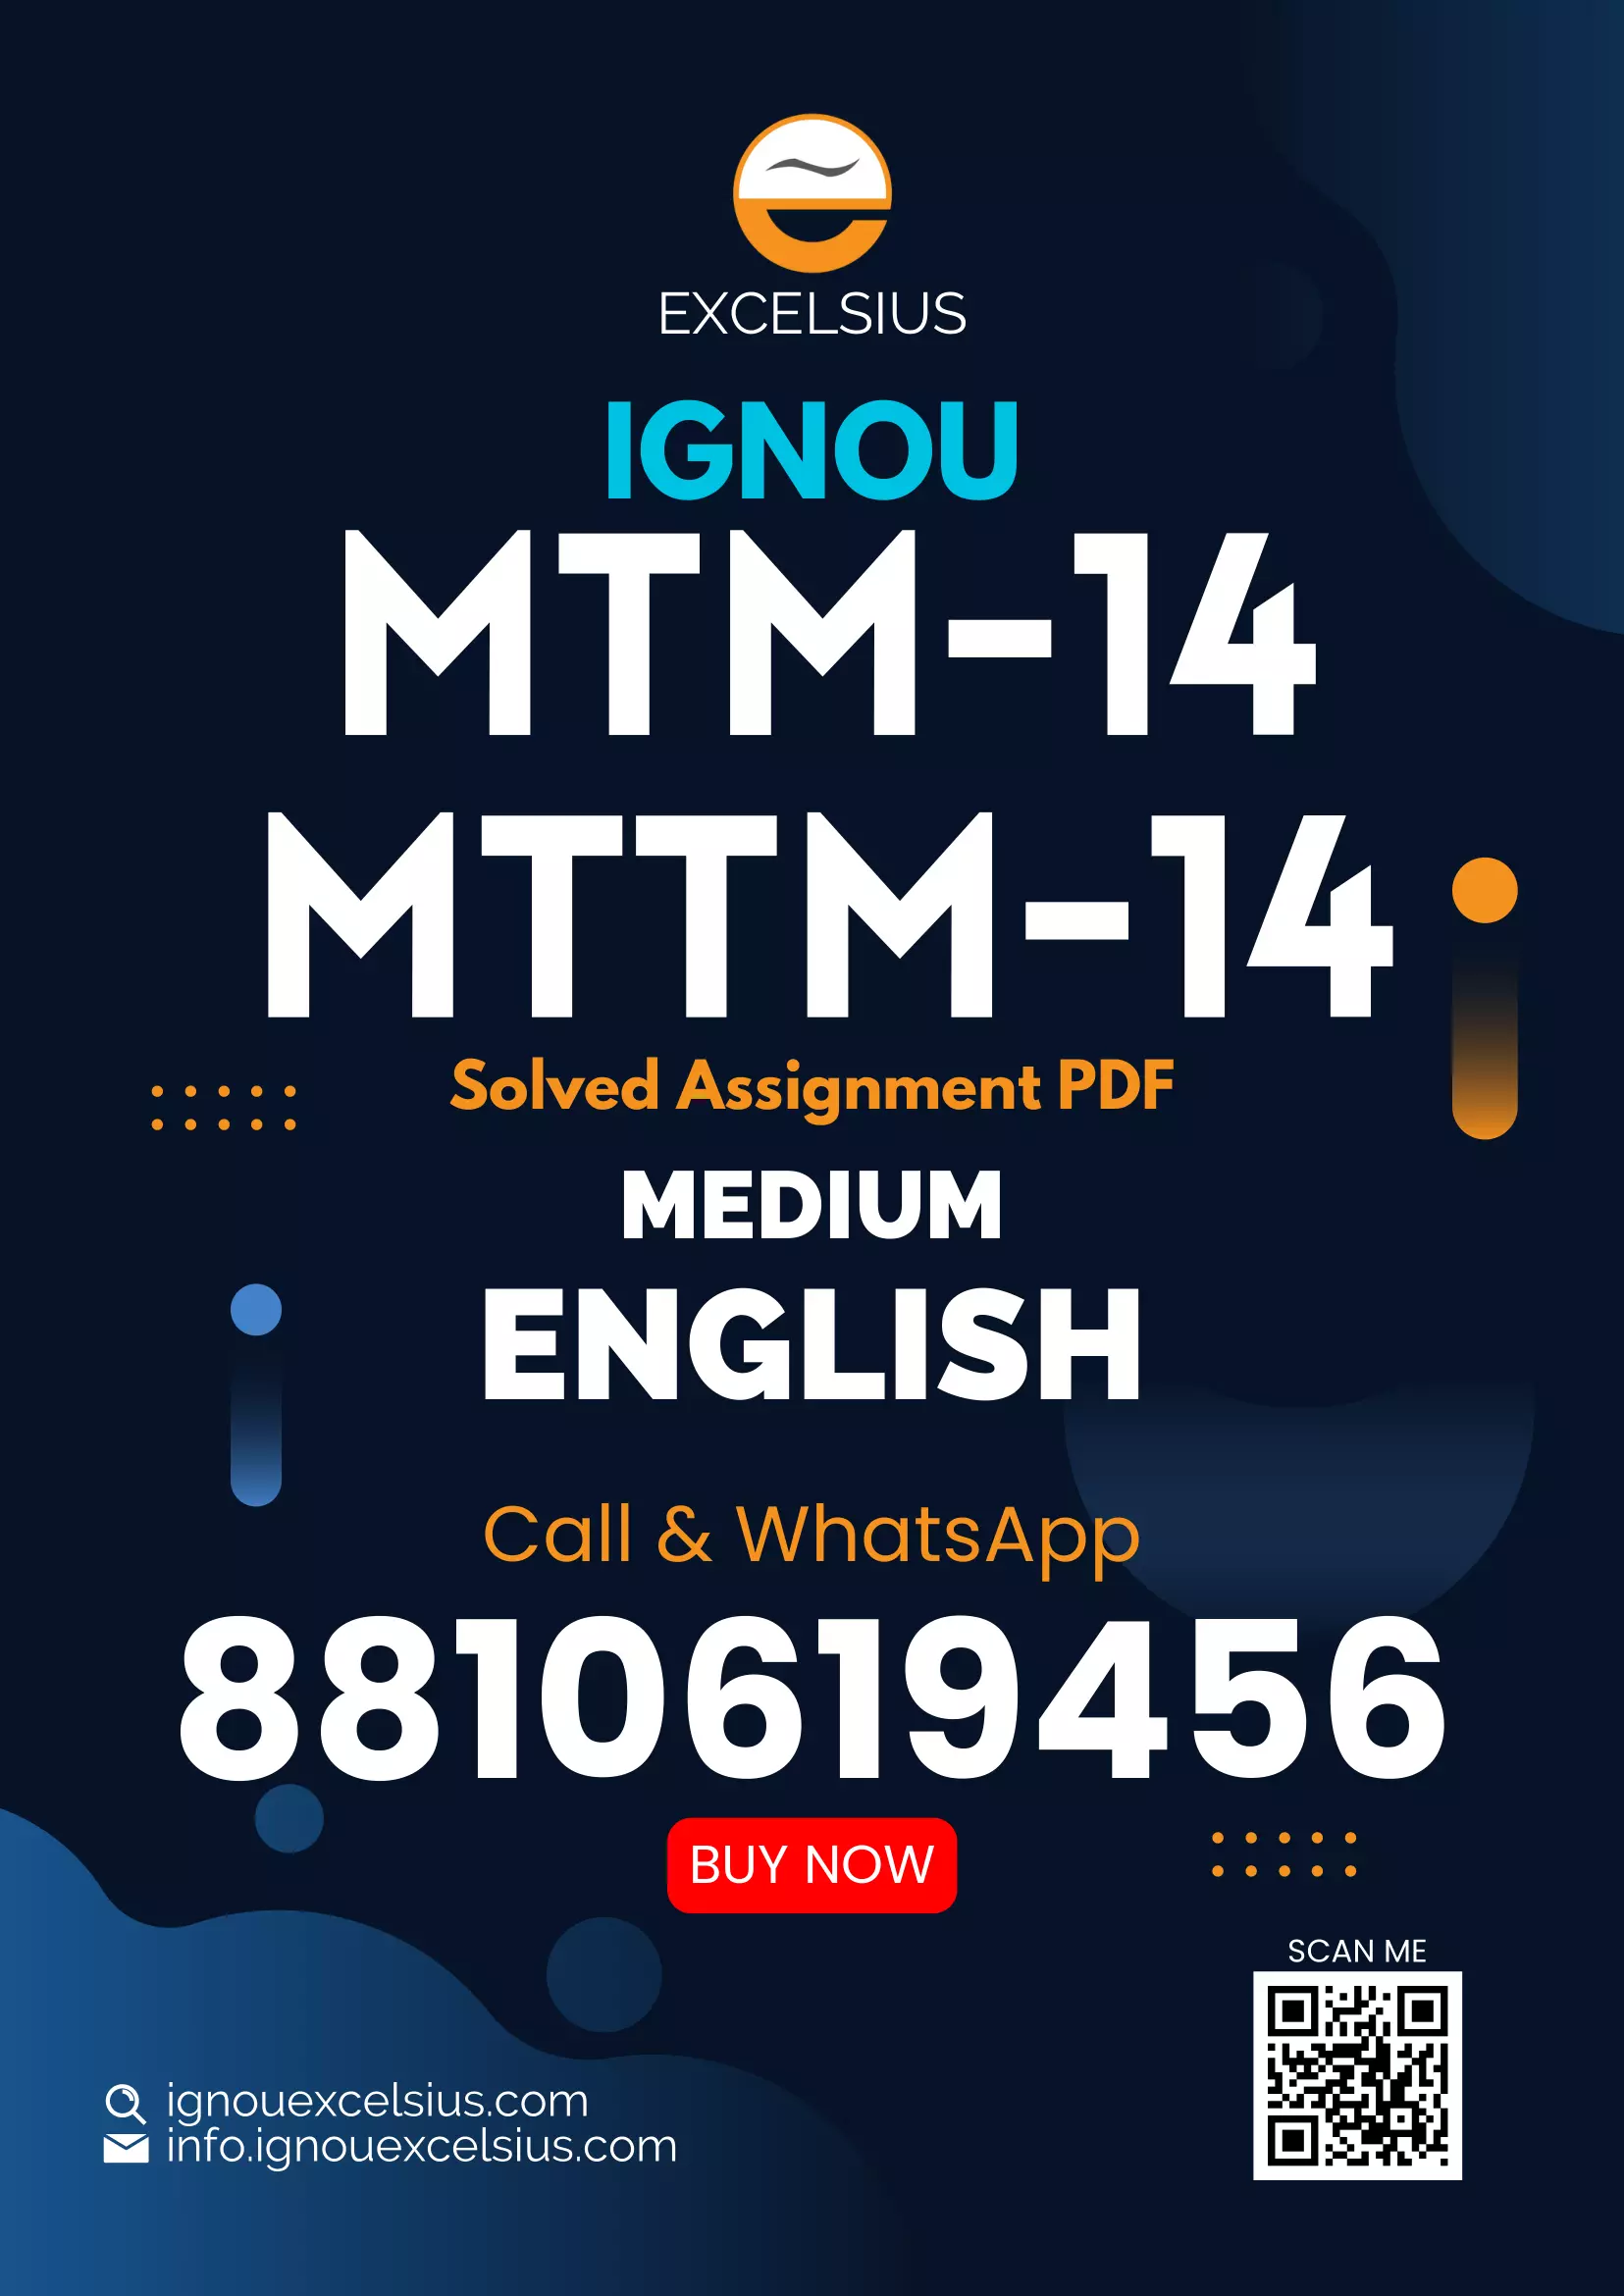 IGNOU MTM-14/MTTM-14 - Tourist Transport Operations (Road Transport), Latest Solved Assignment-January 2023 - July 2023